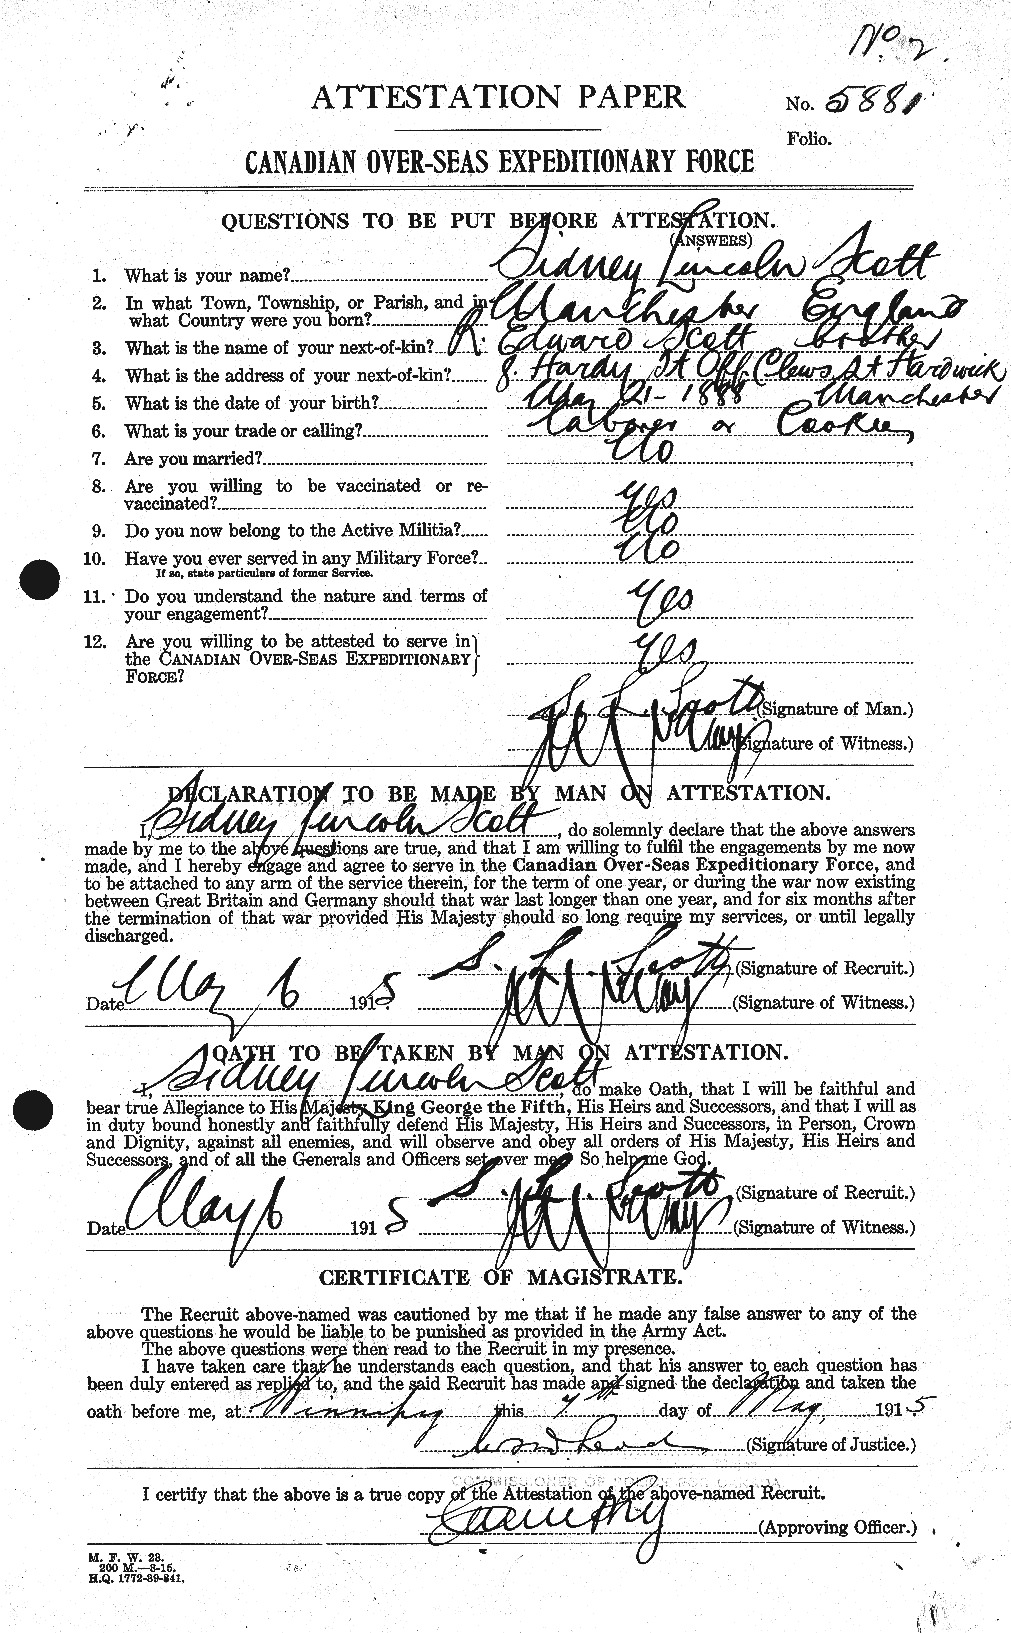 Personnel Records of the First World War - CEF 088845a